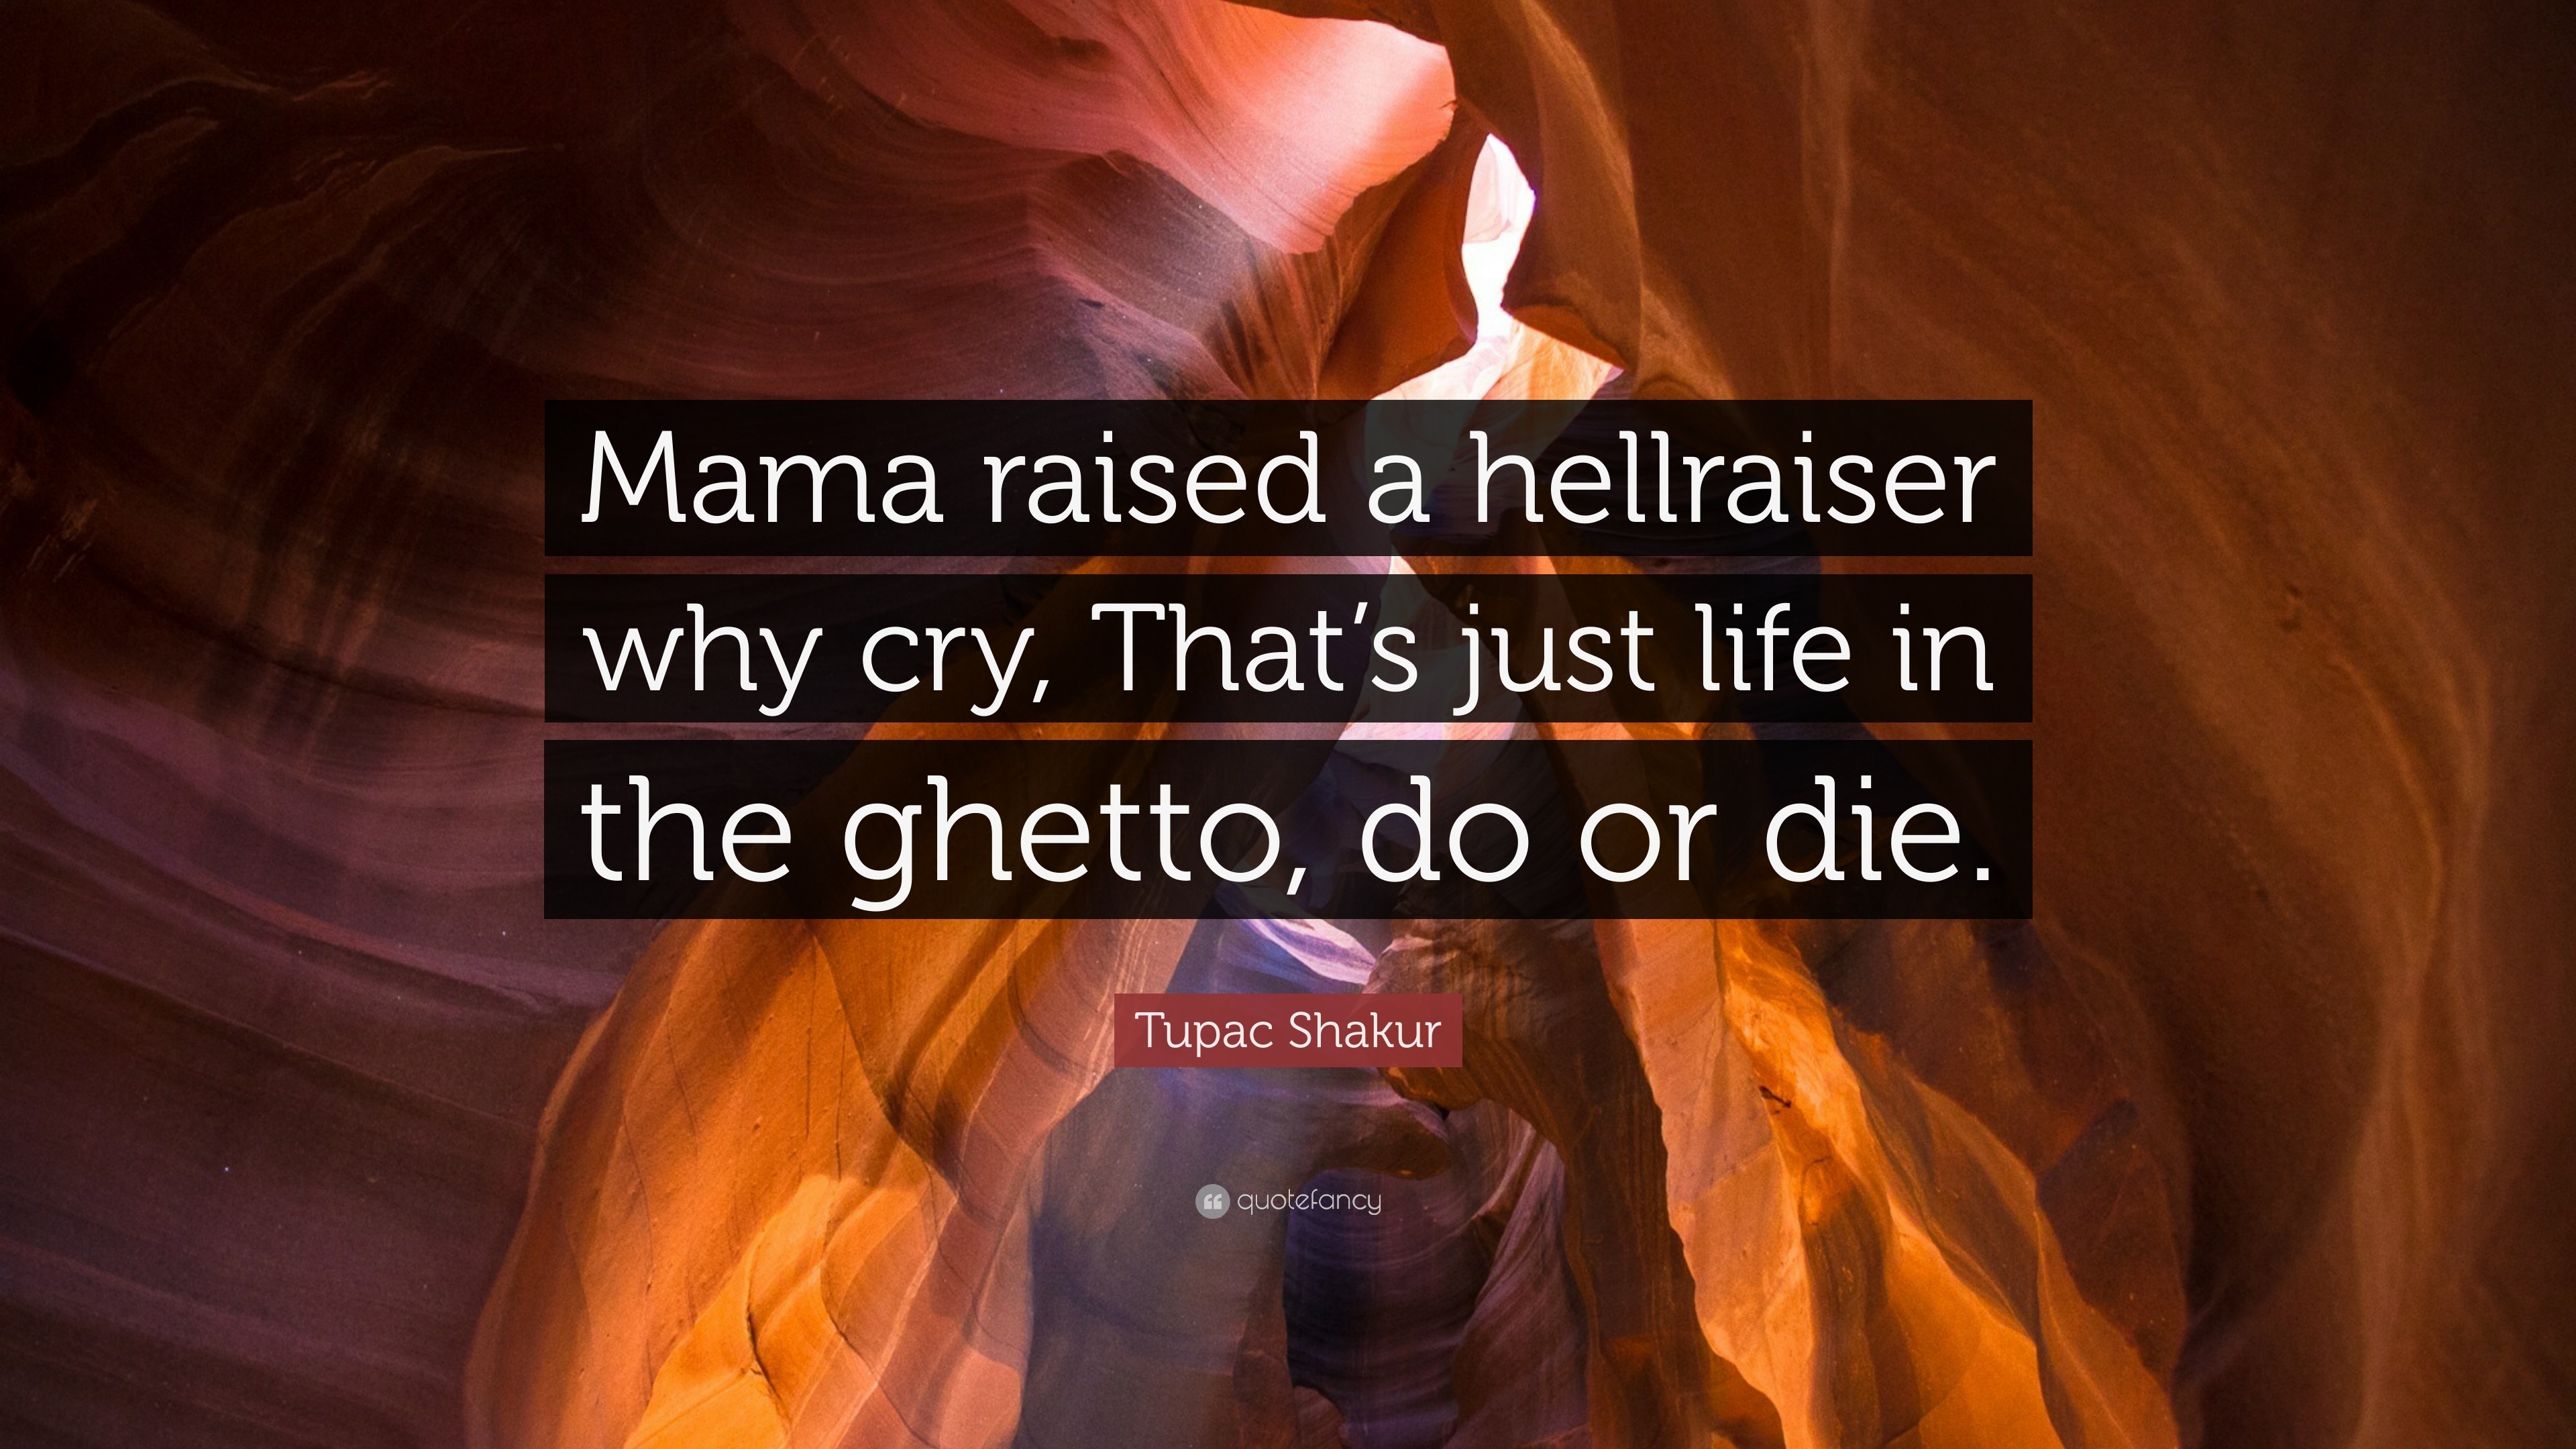 3840x2160 Tupac Shakur Quote: “Mama raised a hellraiser why cry, That's just life in